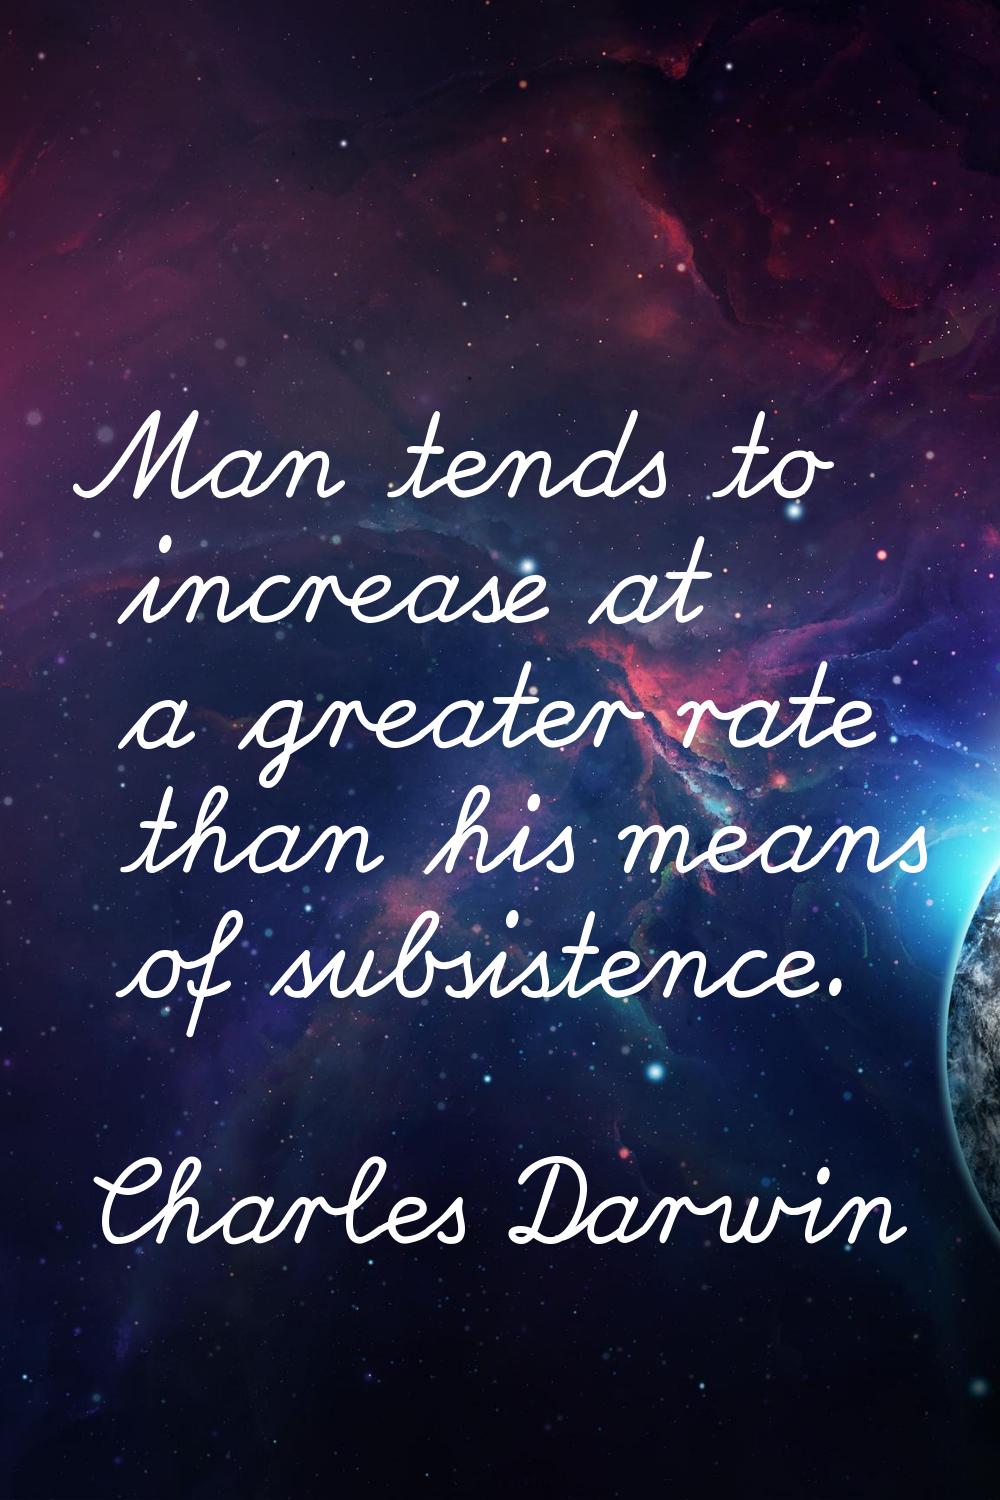 Man tends to increase at a greater rate than his means of subsistence.